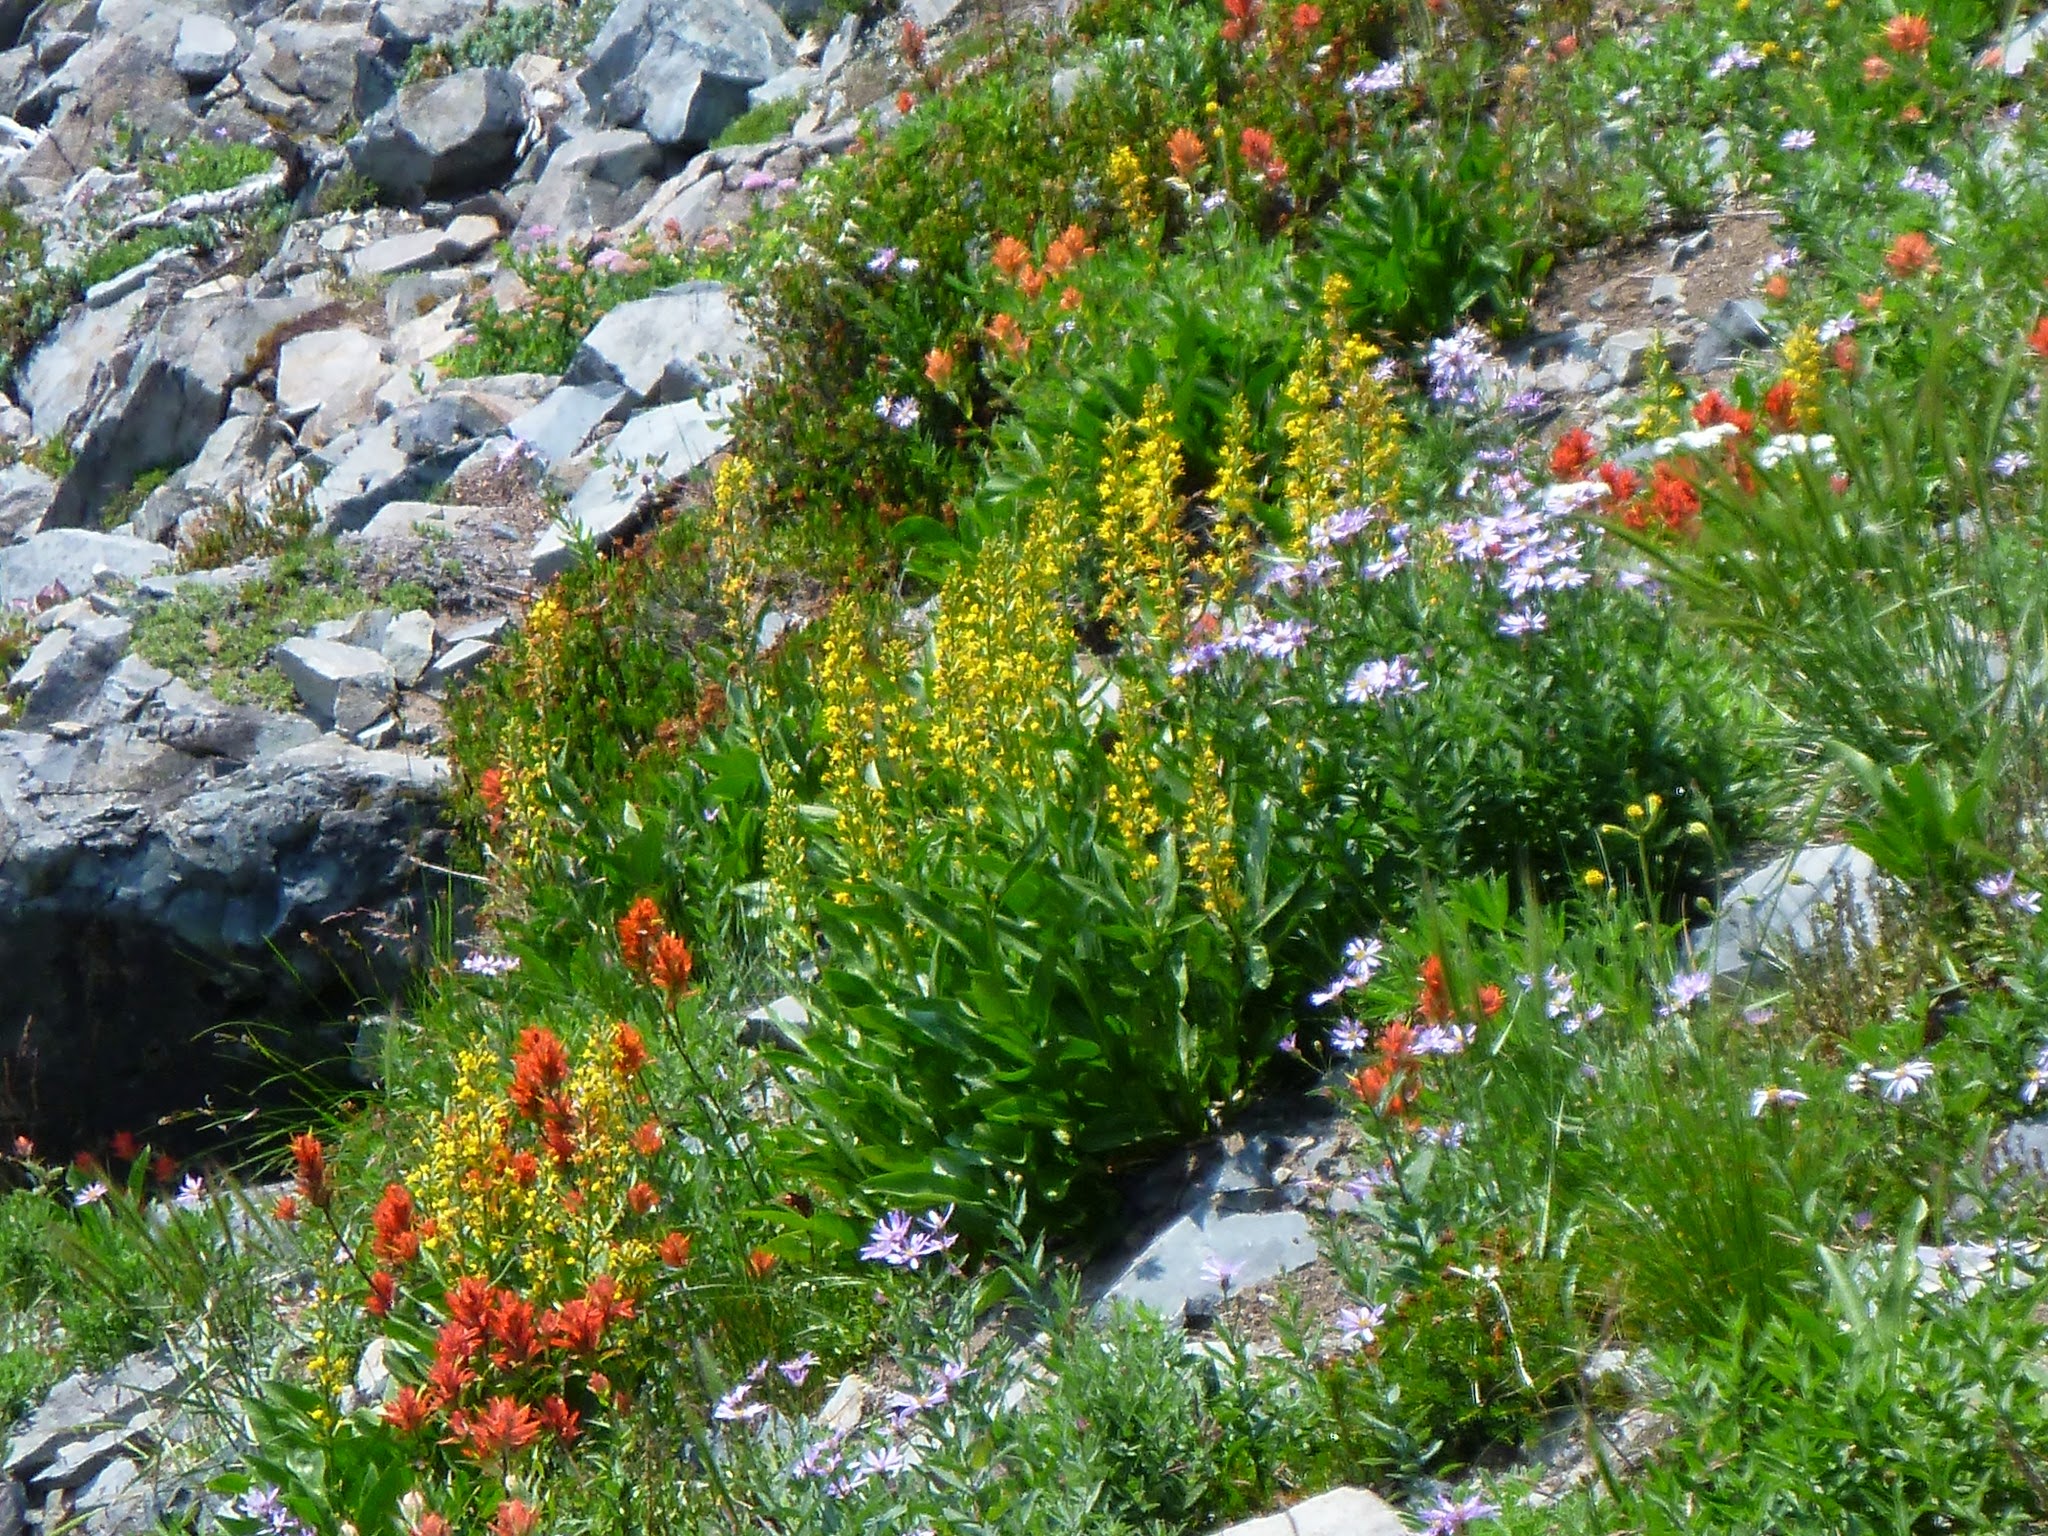 A variety of yellow and orange wildflowers among rocks on the Mt Fremont hike